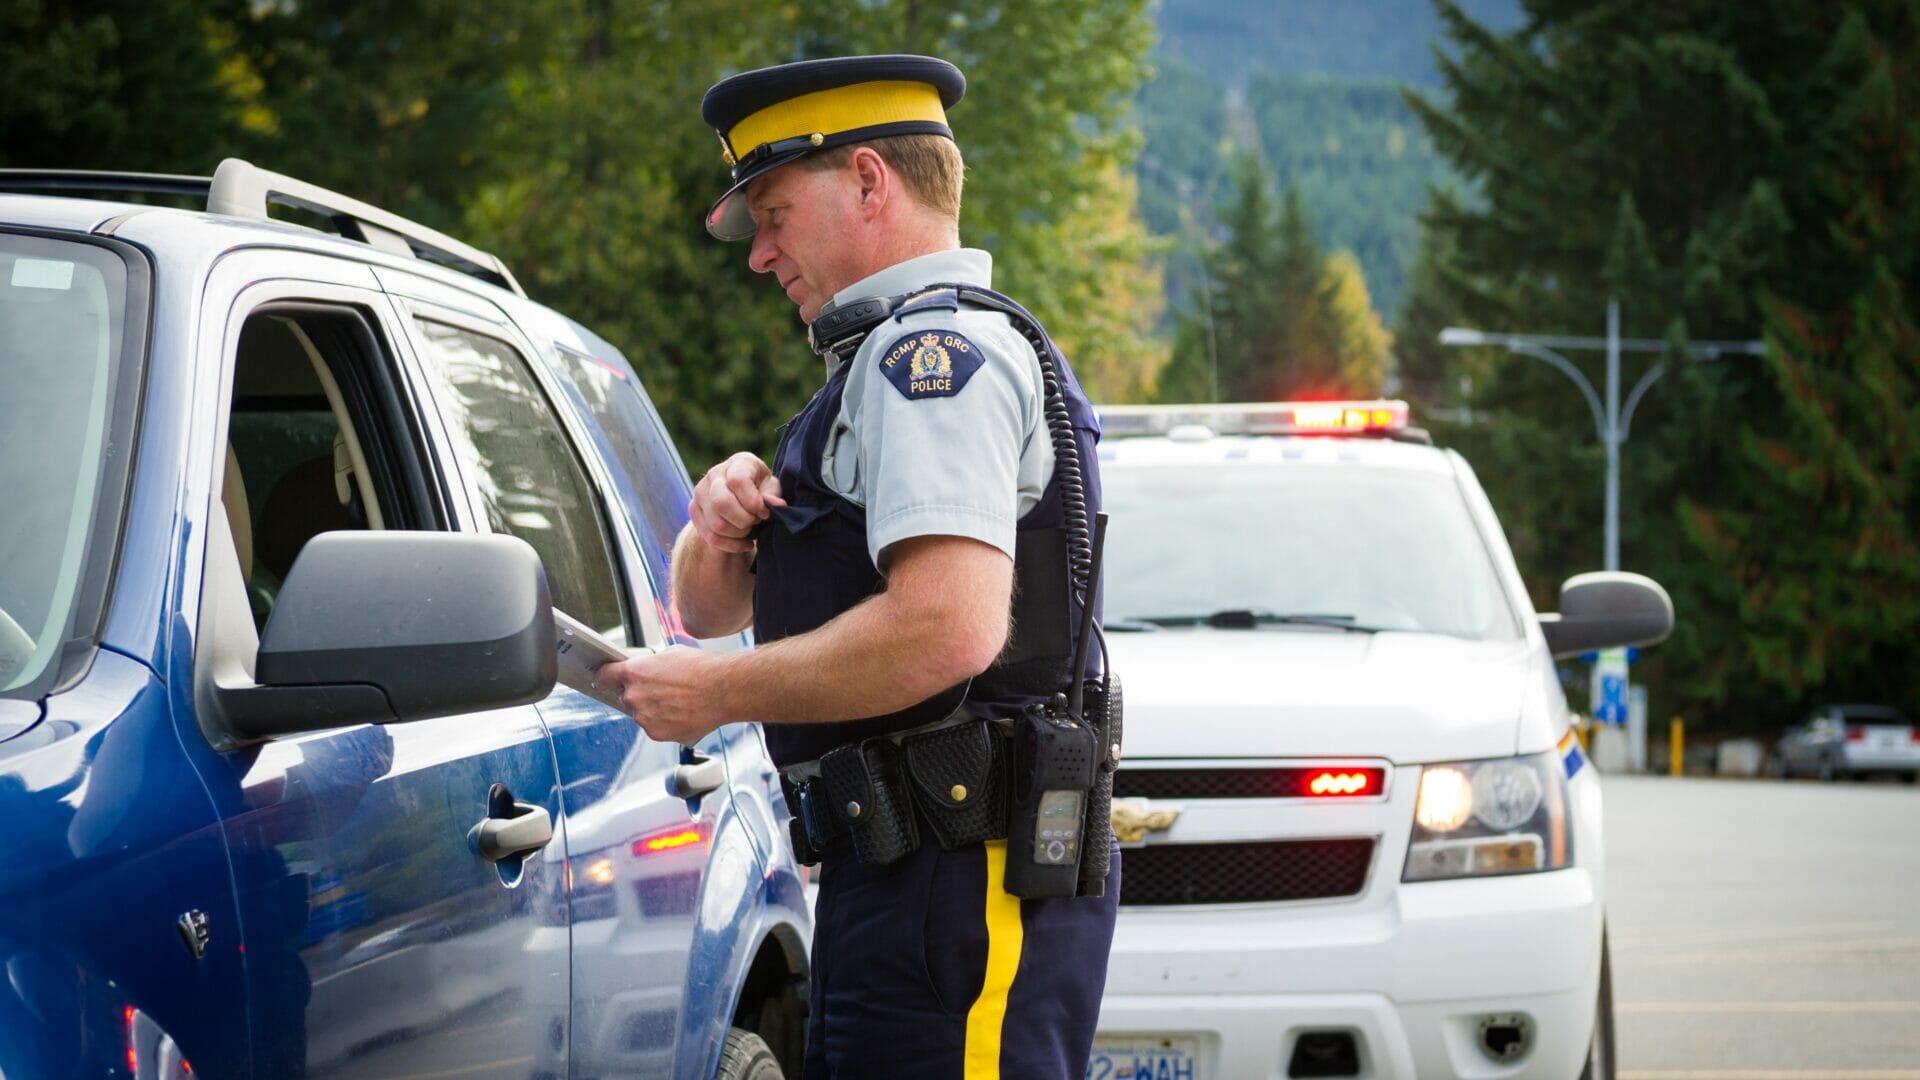 Whistler RCMP officer photo by Mike Crane